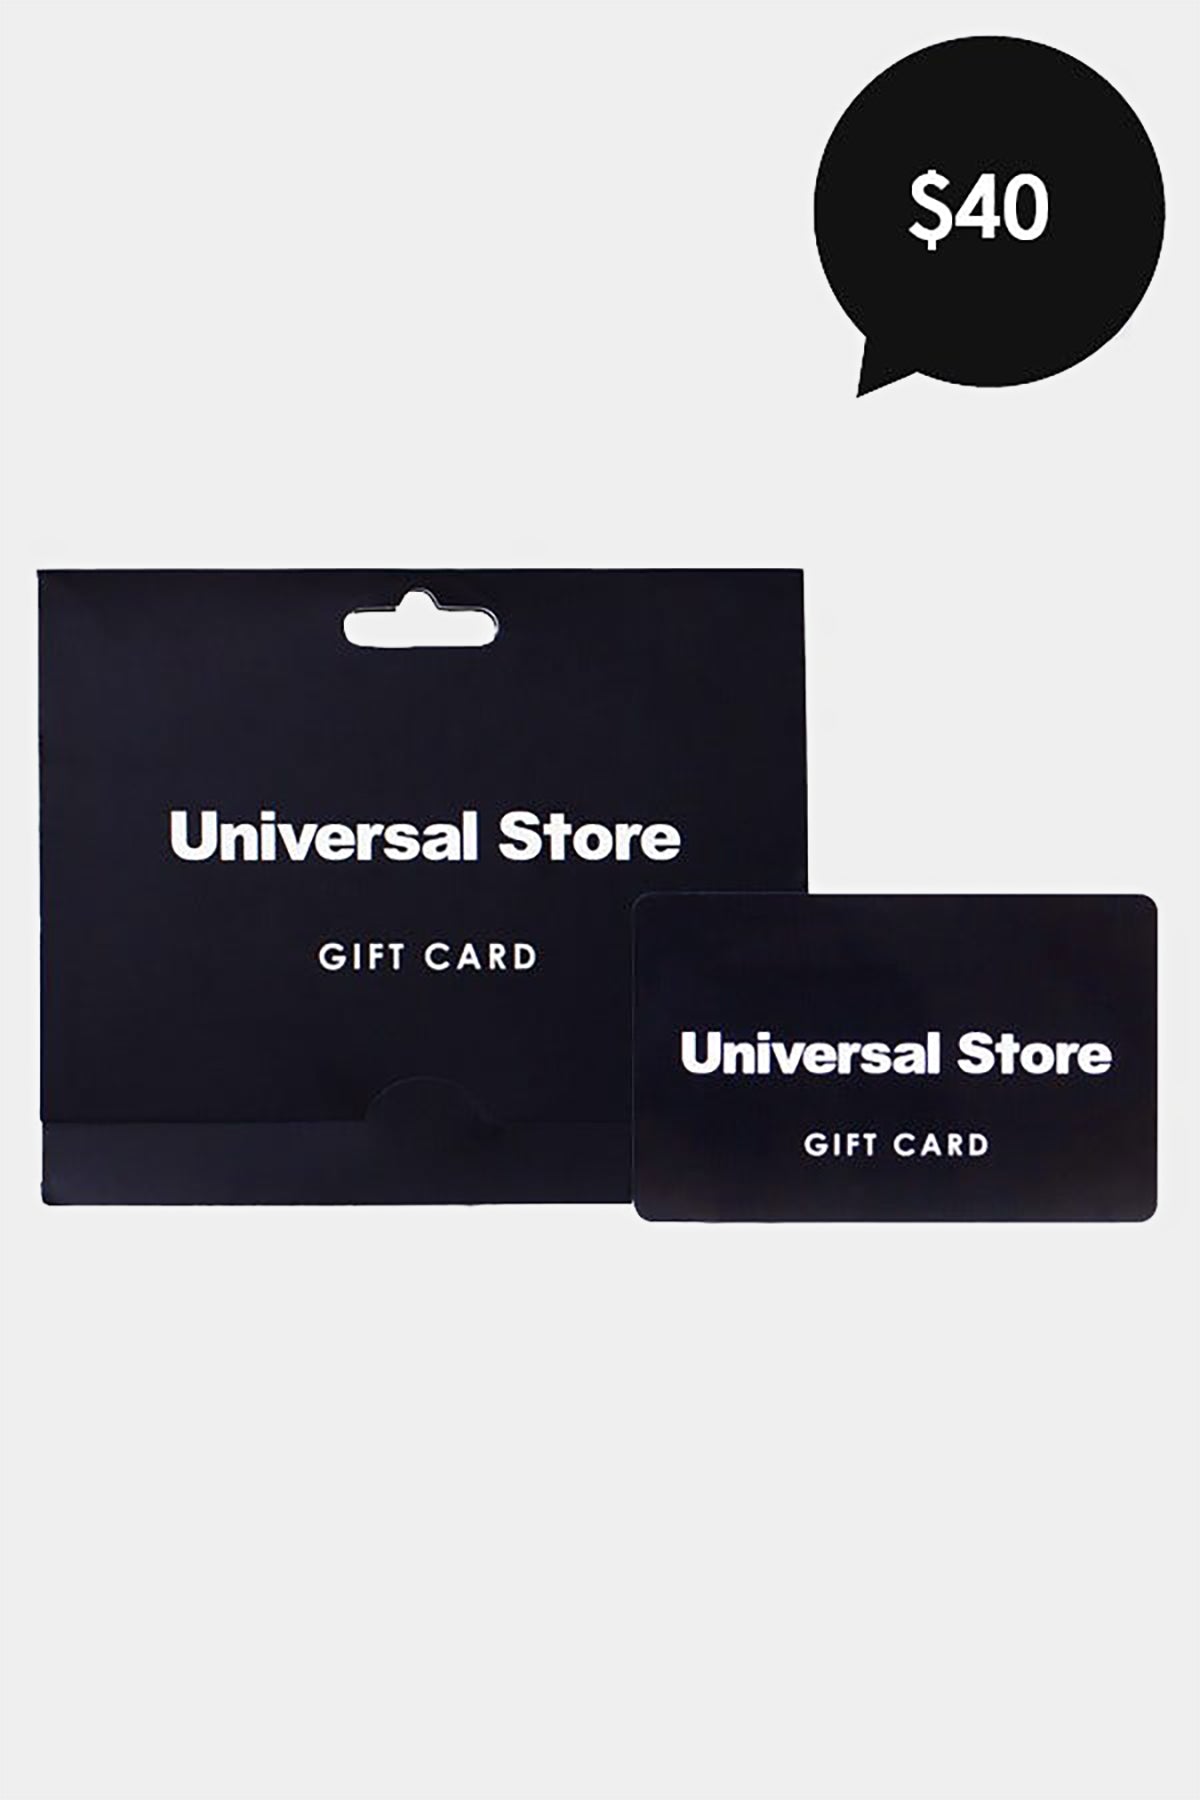 Universal Store $40 Gift Card